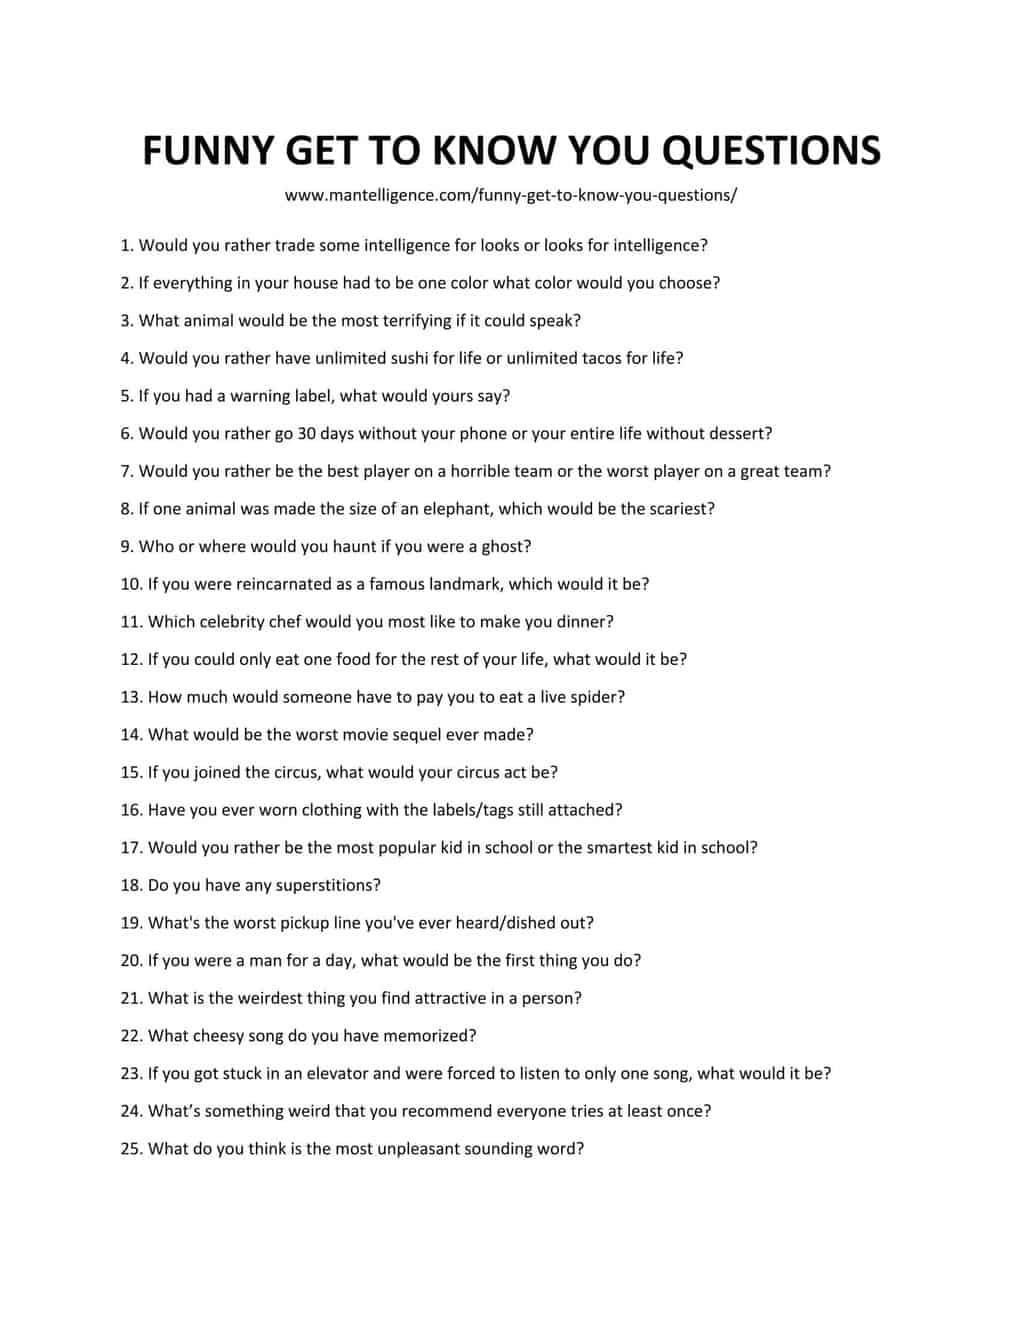 FUNNY GET TO KNOW YOU QUESTIONS 